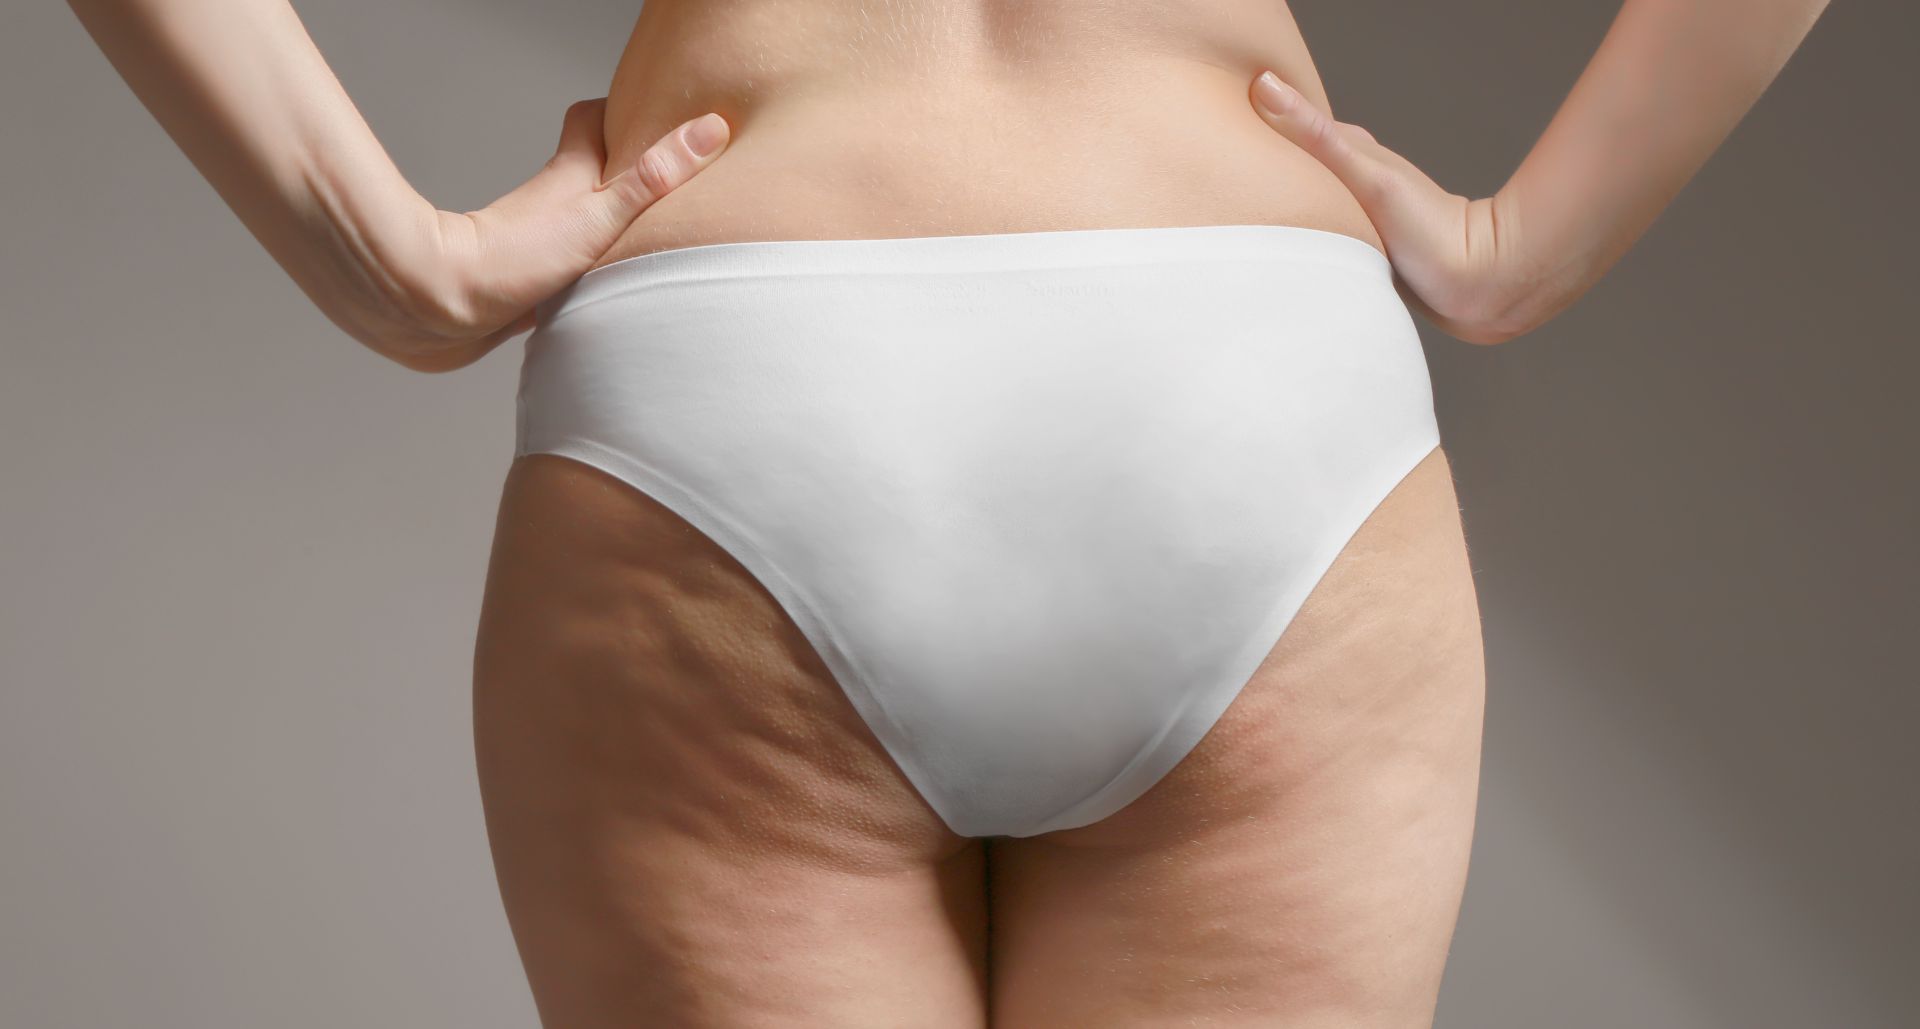 Cellulite Causes, Symptoms, and Treatments